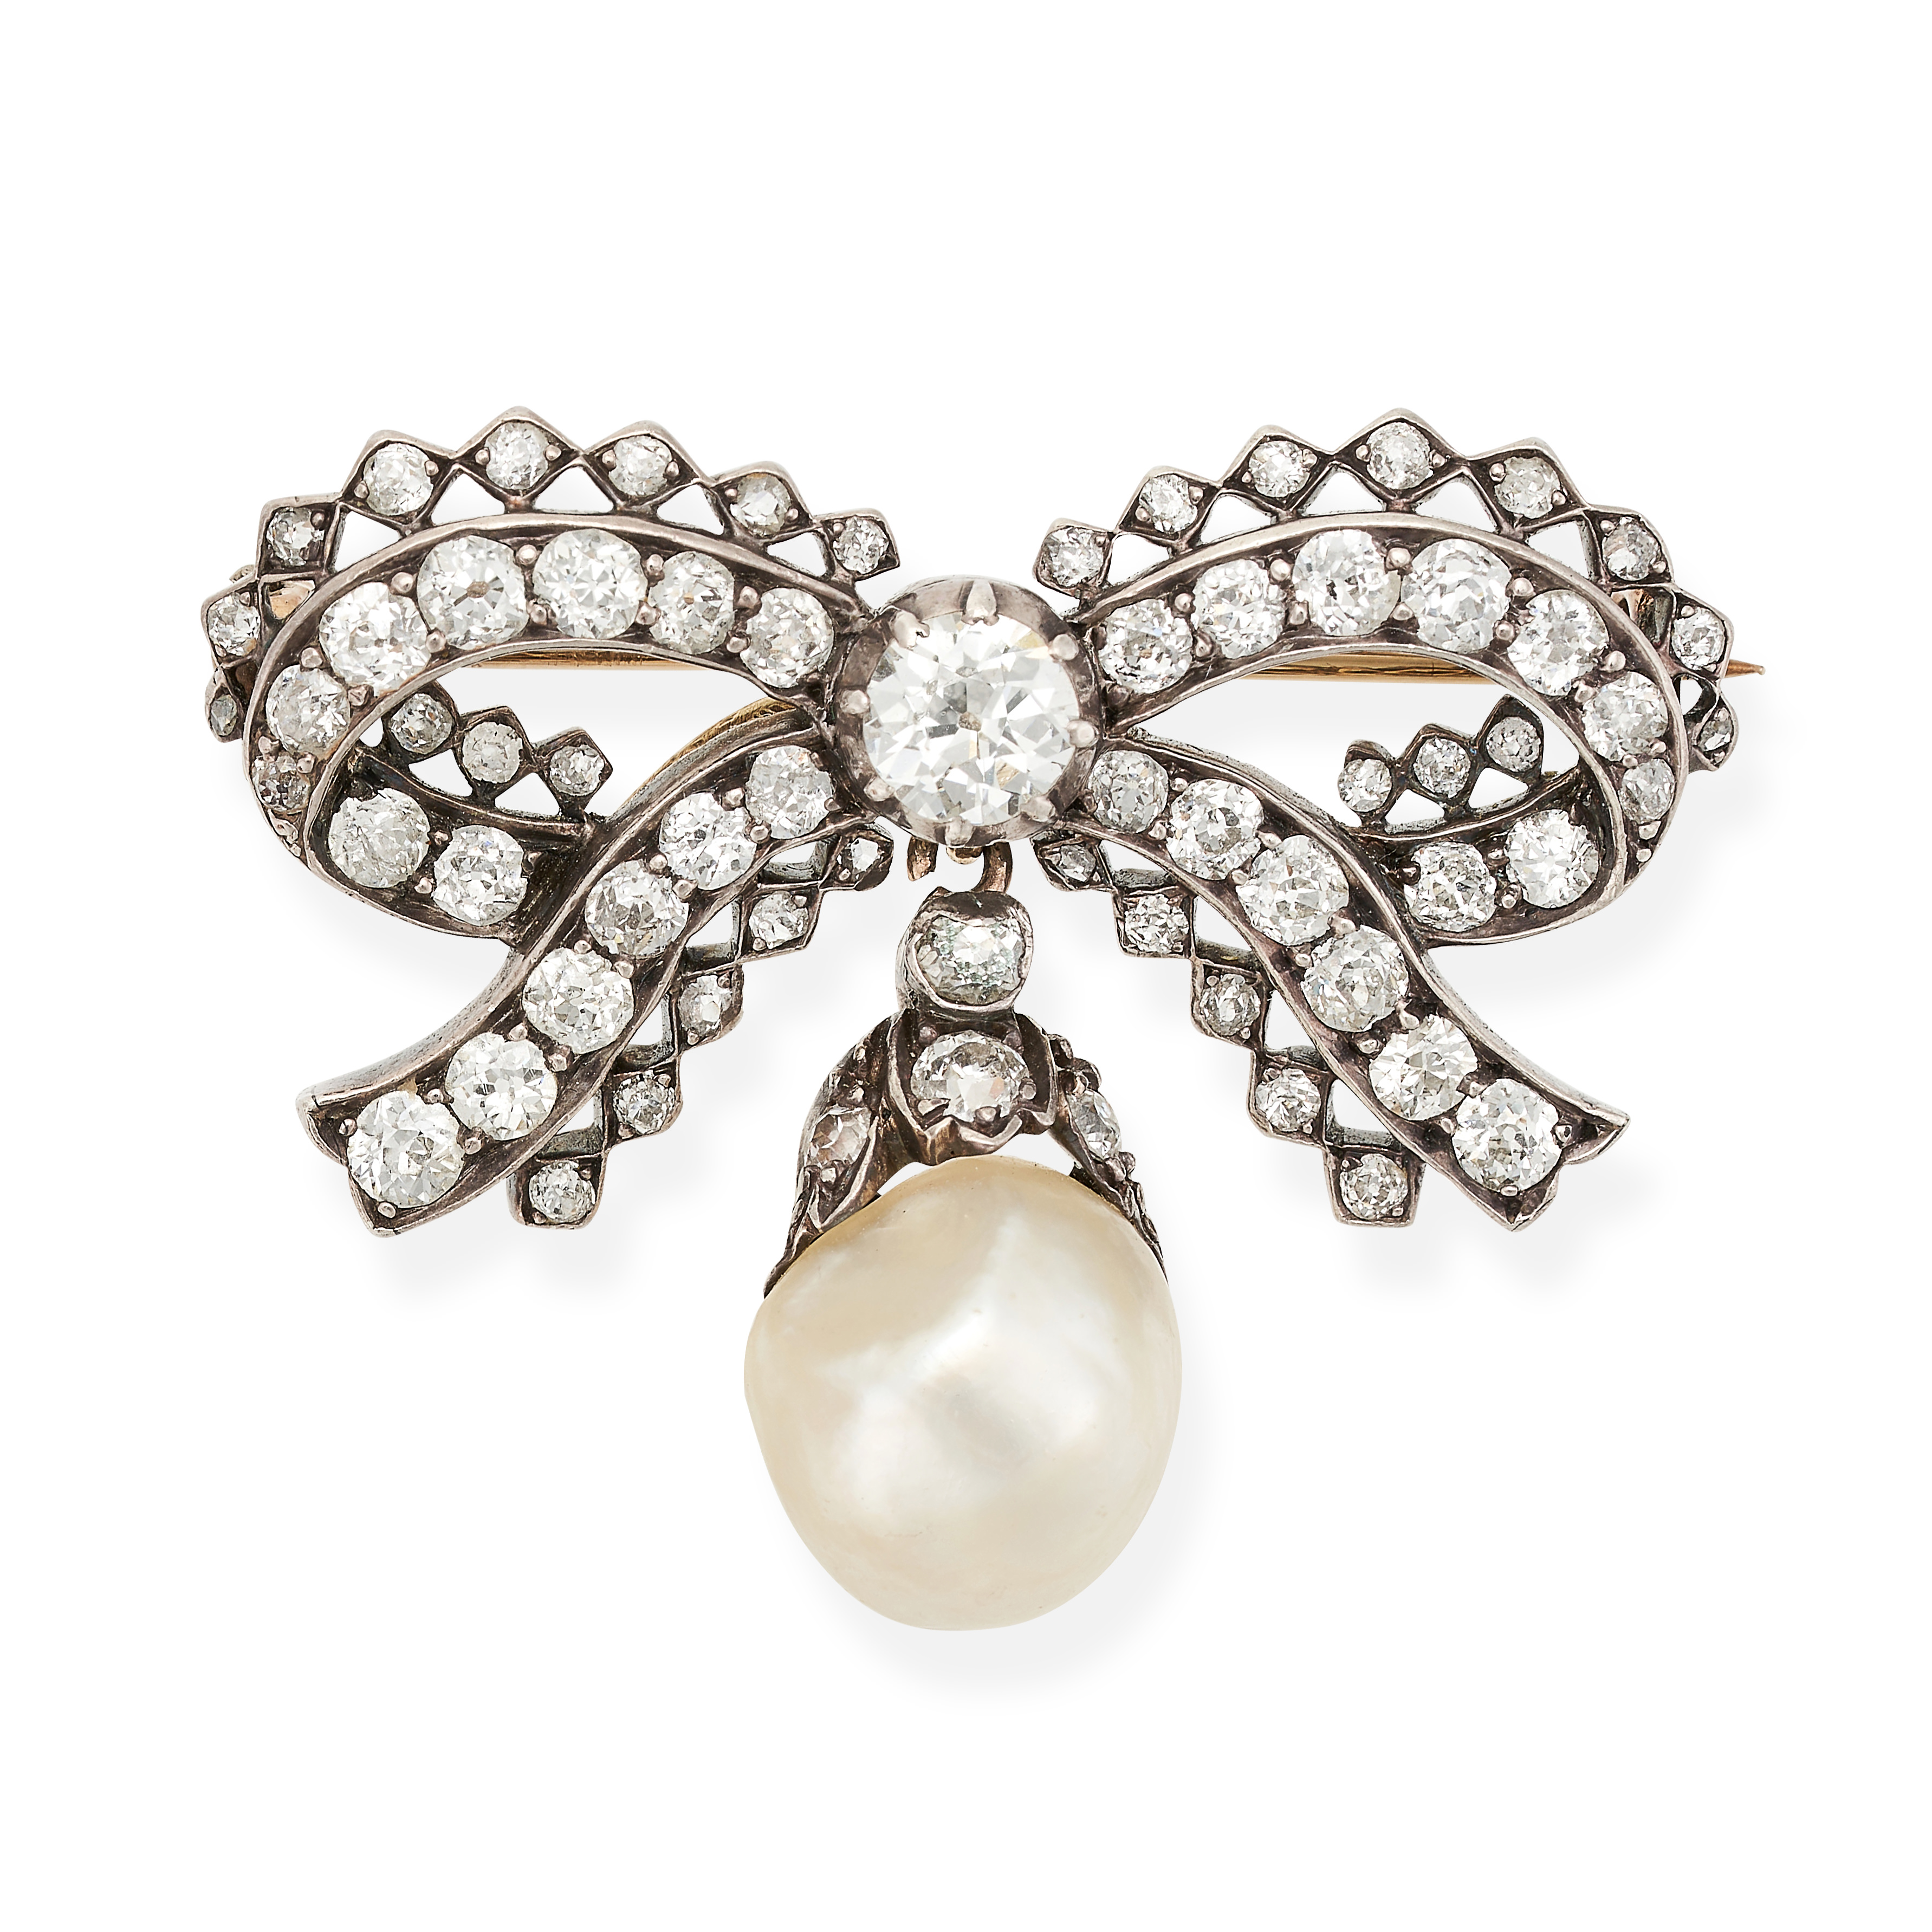 NO RESERVE - AN ANTIQUE DIAMOND AND PEARL BOW BROOCH in yellow gold and silver, designed as a bow...